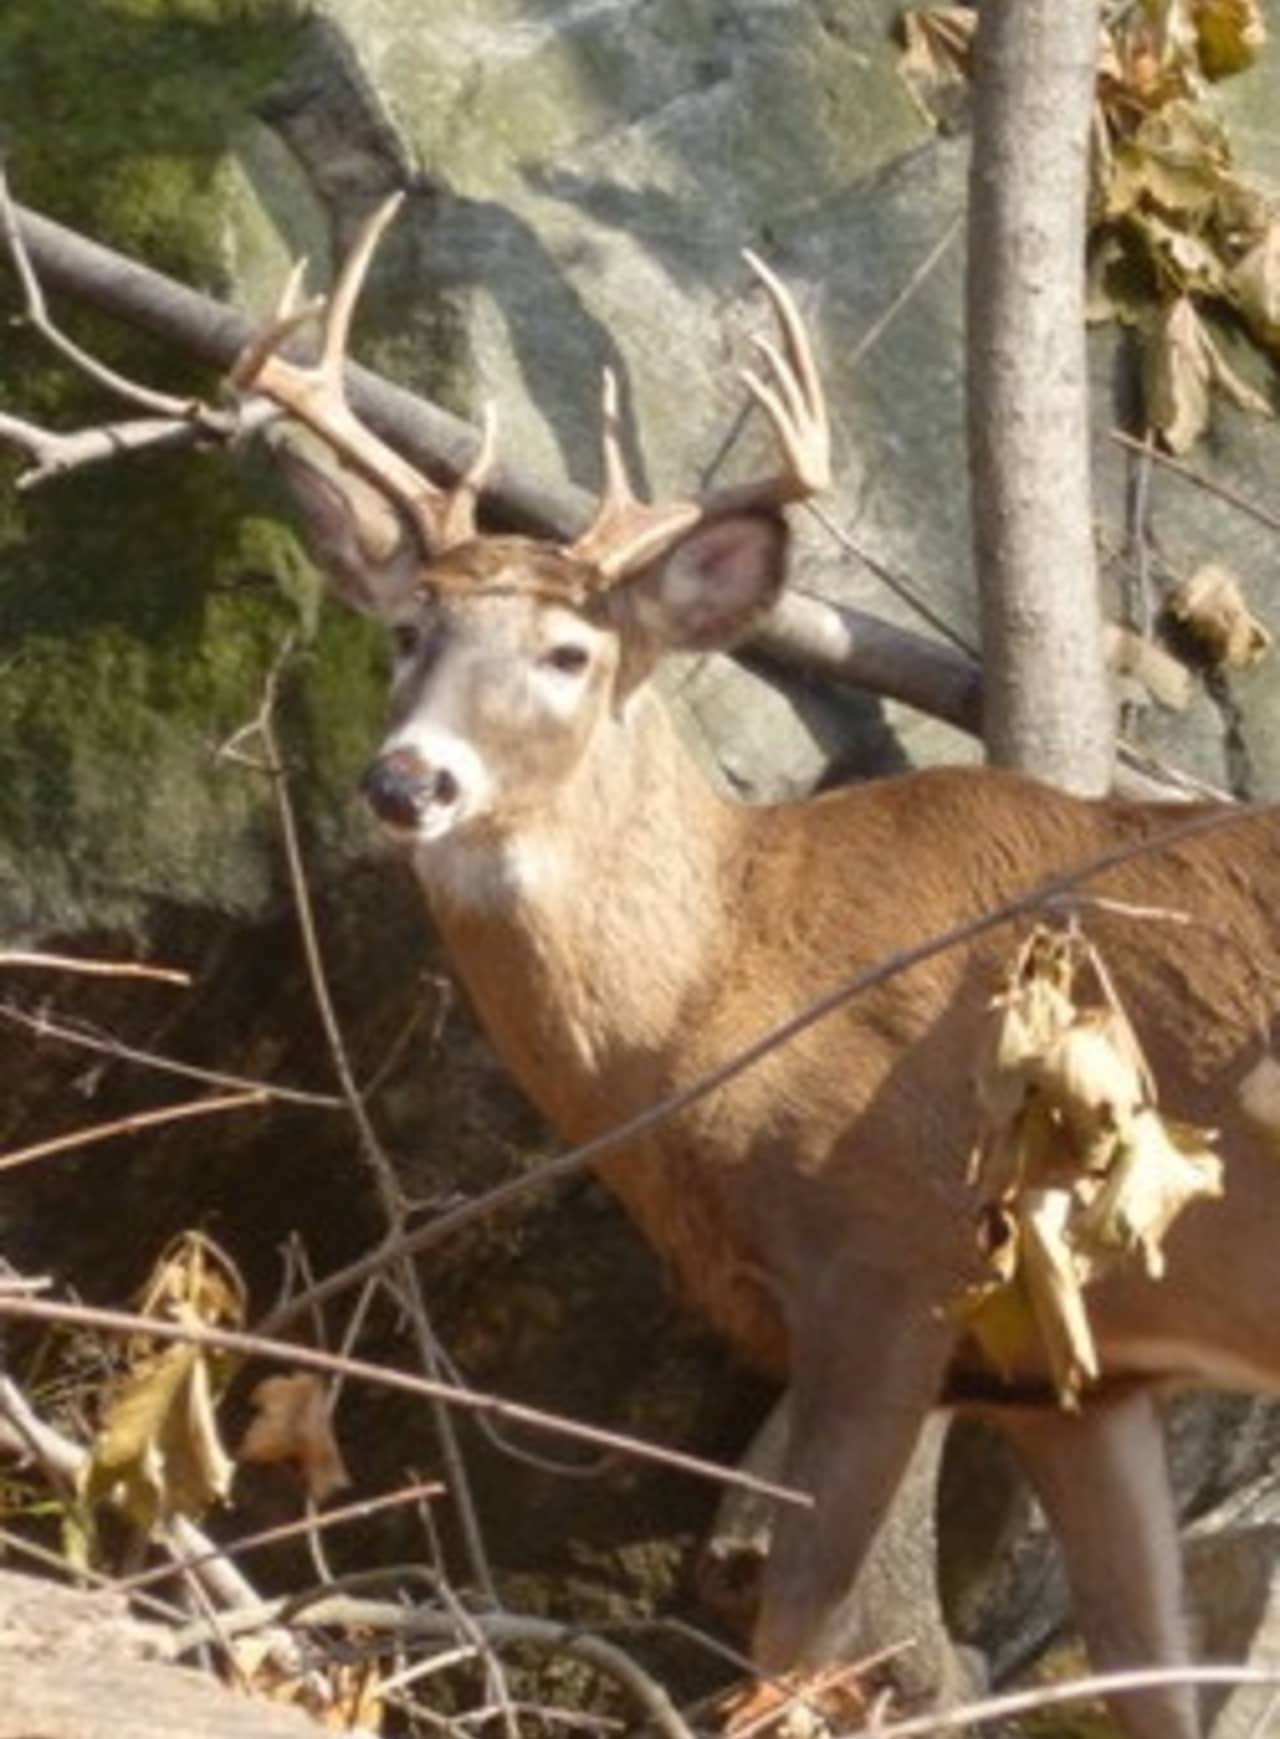 Teatown officials reported 11 deer were shot and killed as part of a recent cull. 